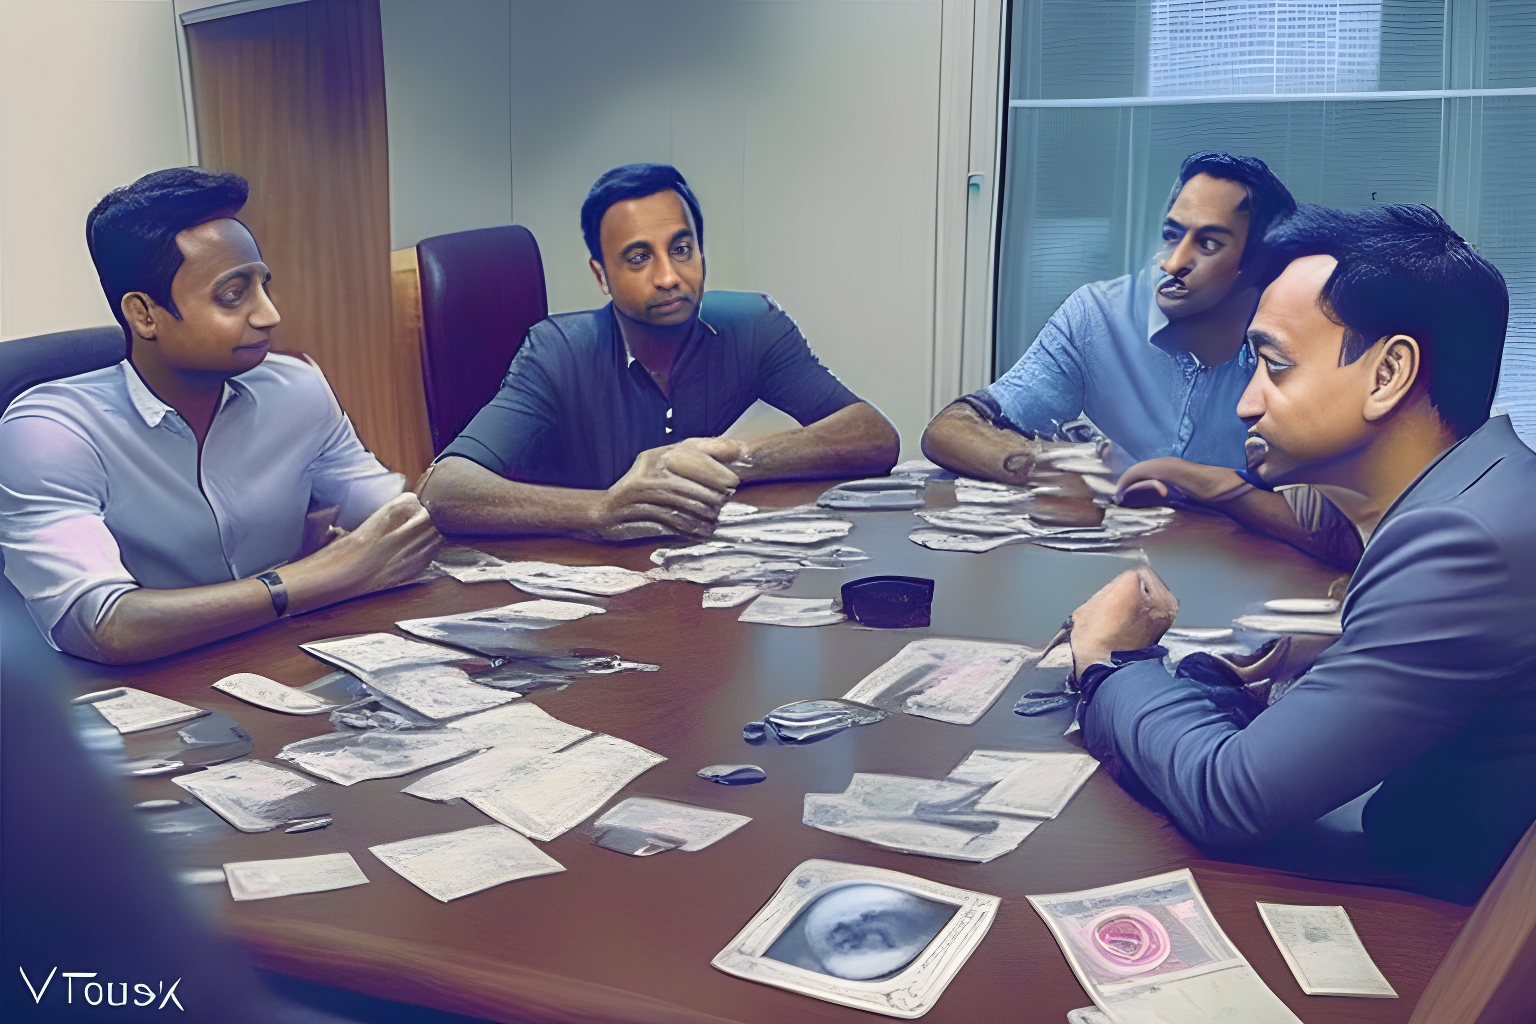 Former Twitter CEO Parag Agrawal, in a board room with current Twitter CEO Elon Musk, table stacked with cash